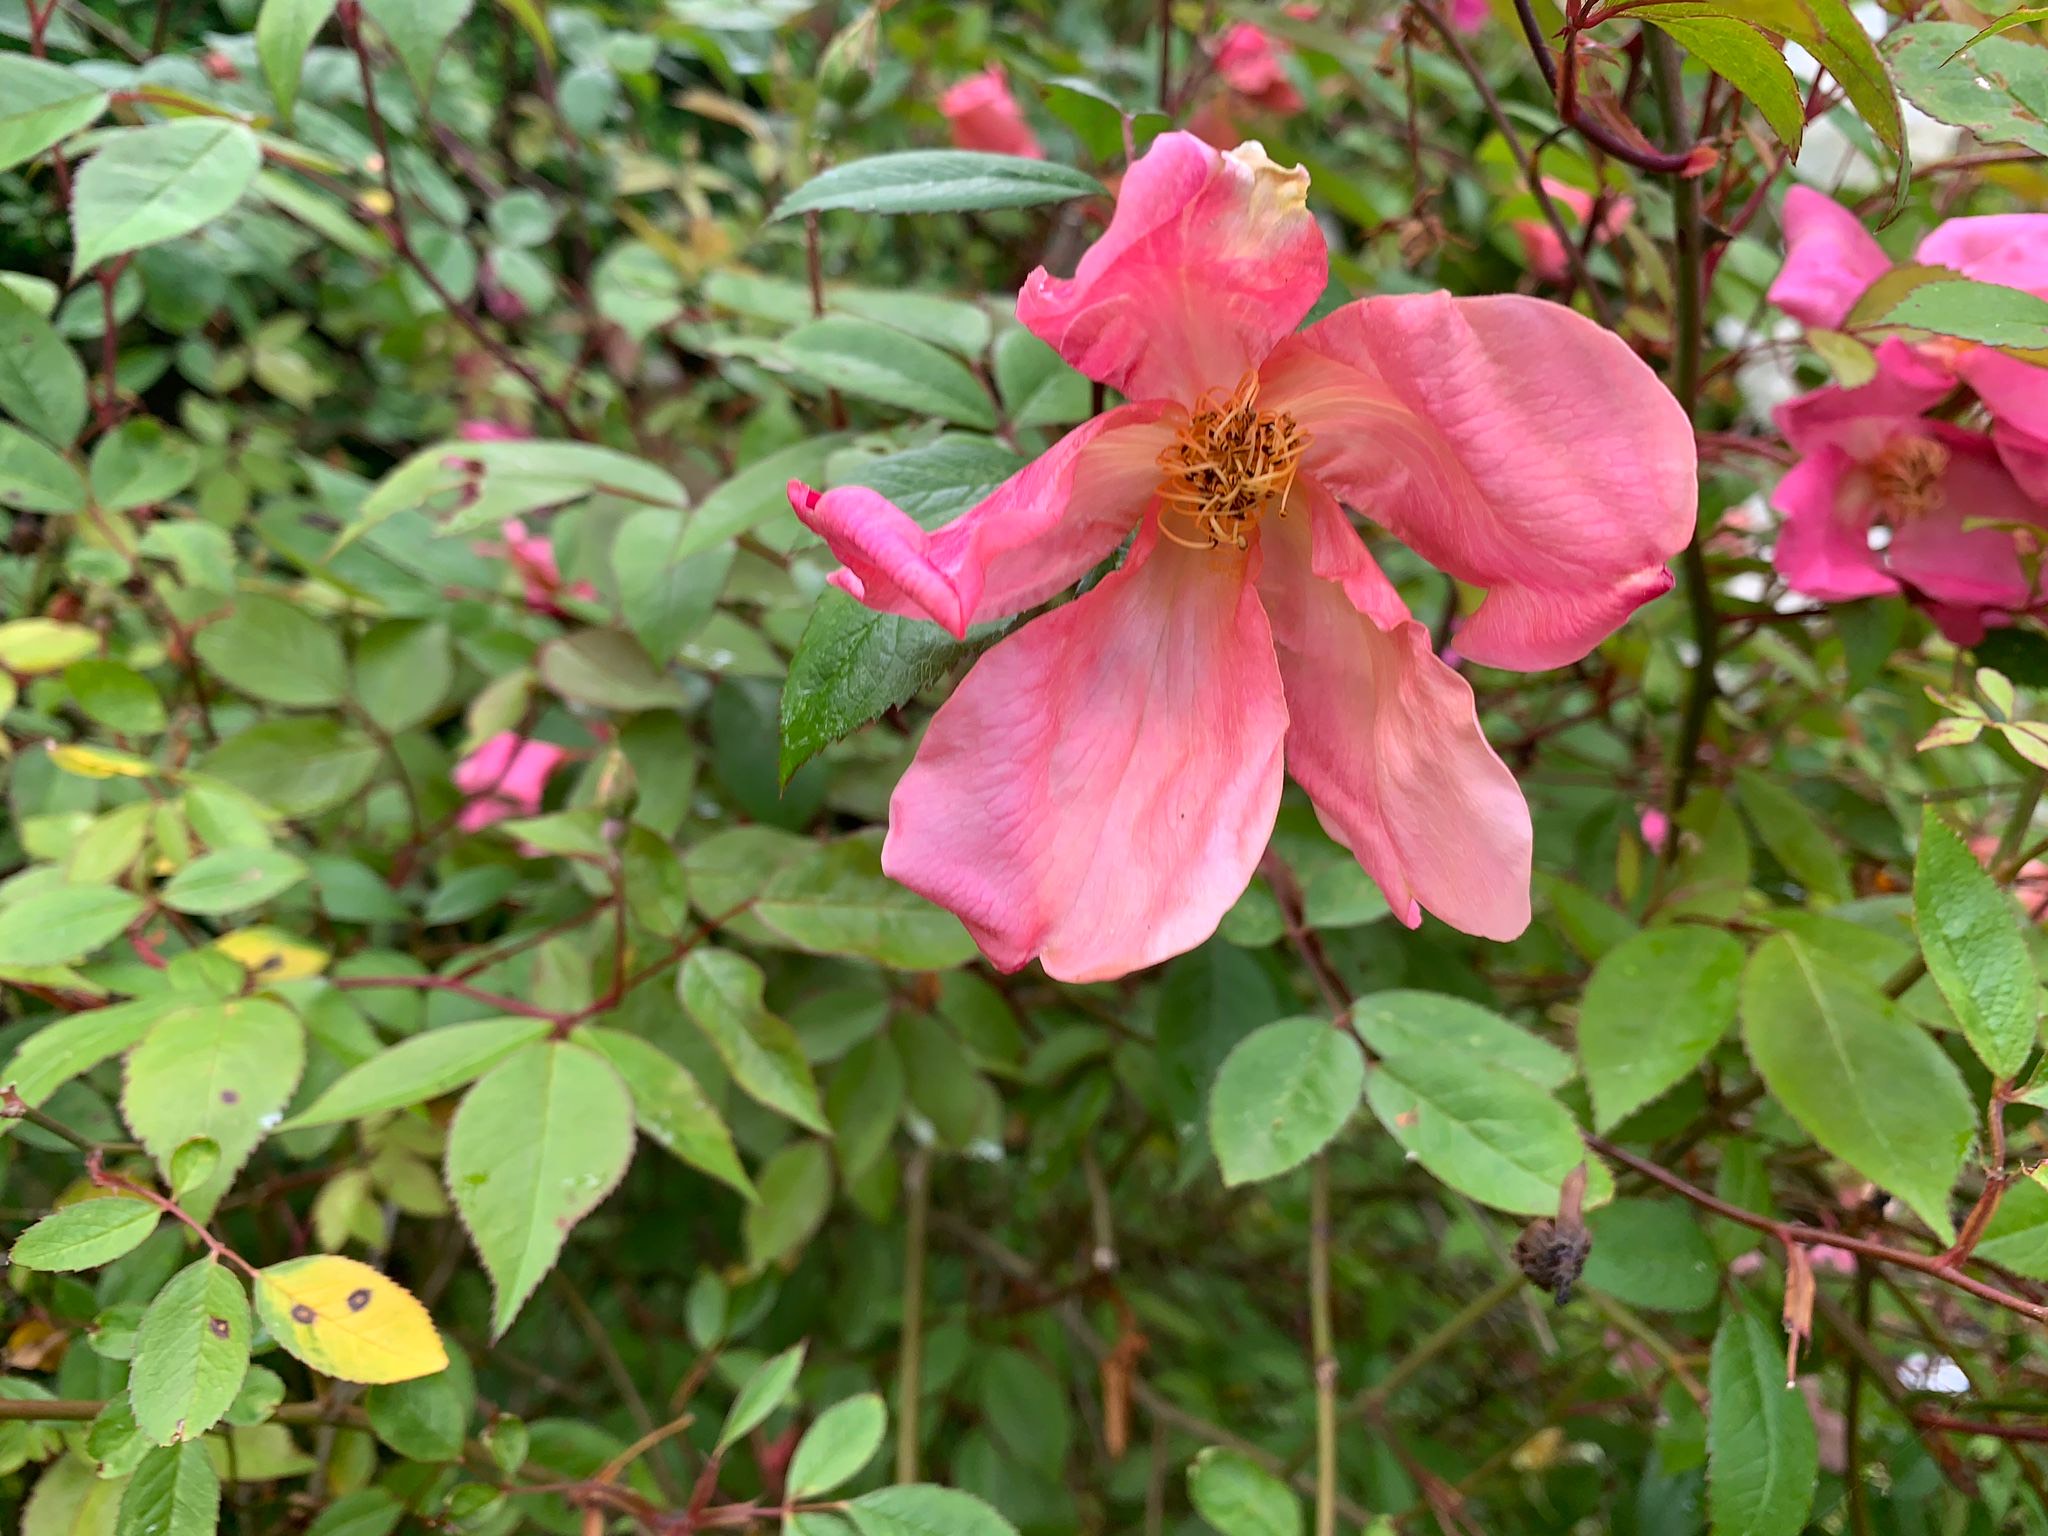 Unknown species rose in John's garden which he says is similar to Glauca but different foliage.